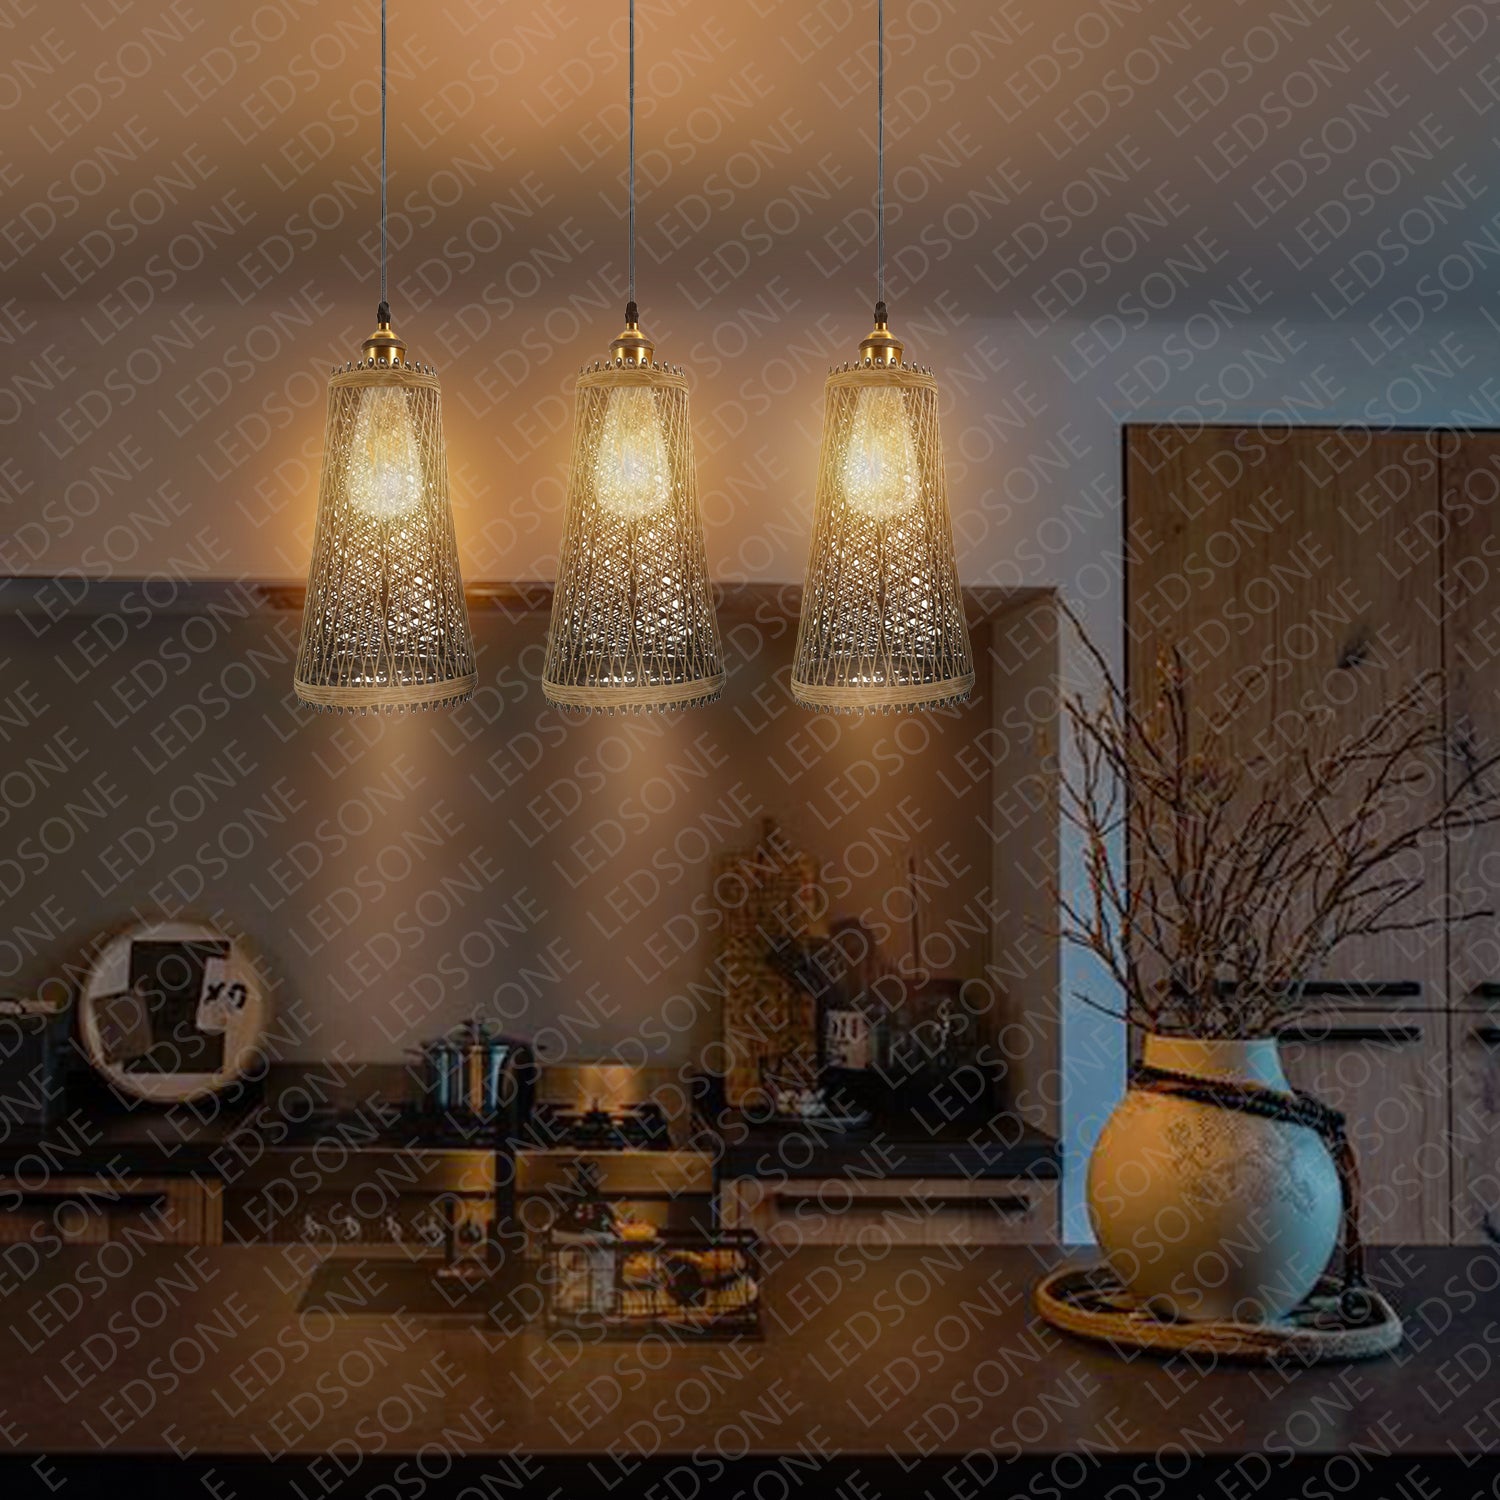 Natural Rattan Style Ceiling Pendant Light Shade E27 Base Handmade Chandeliers Hanging Lights 